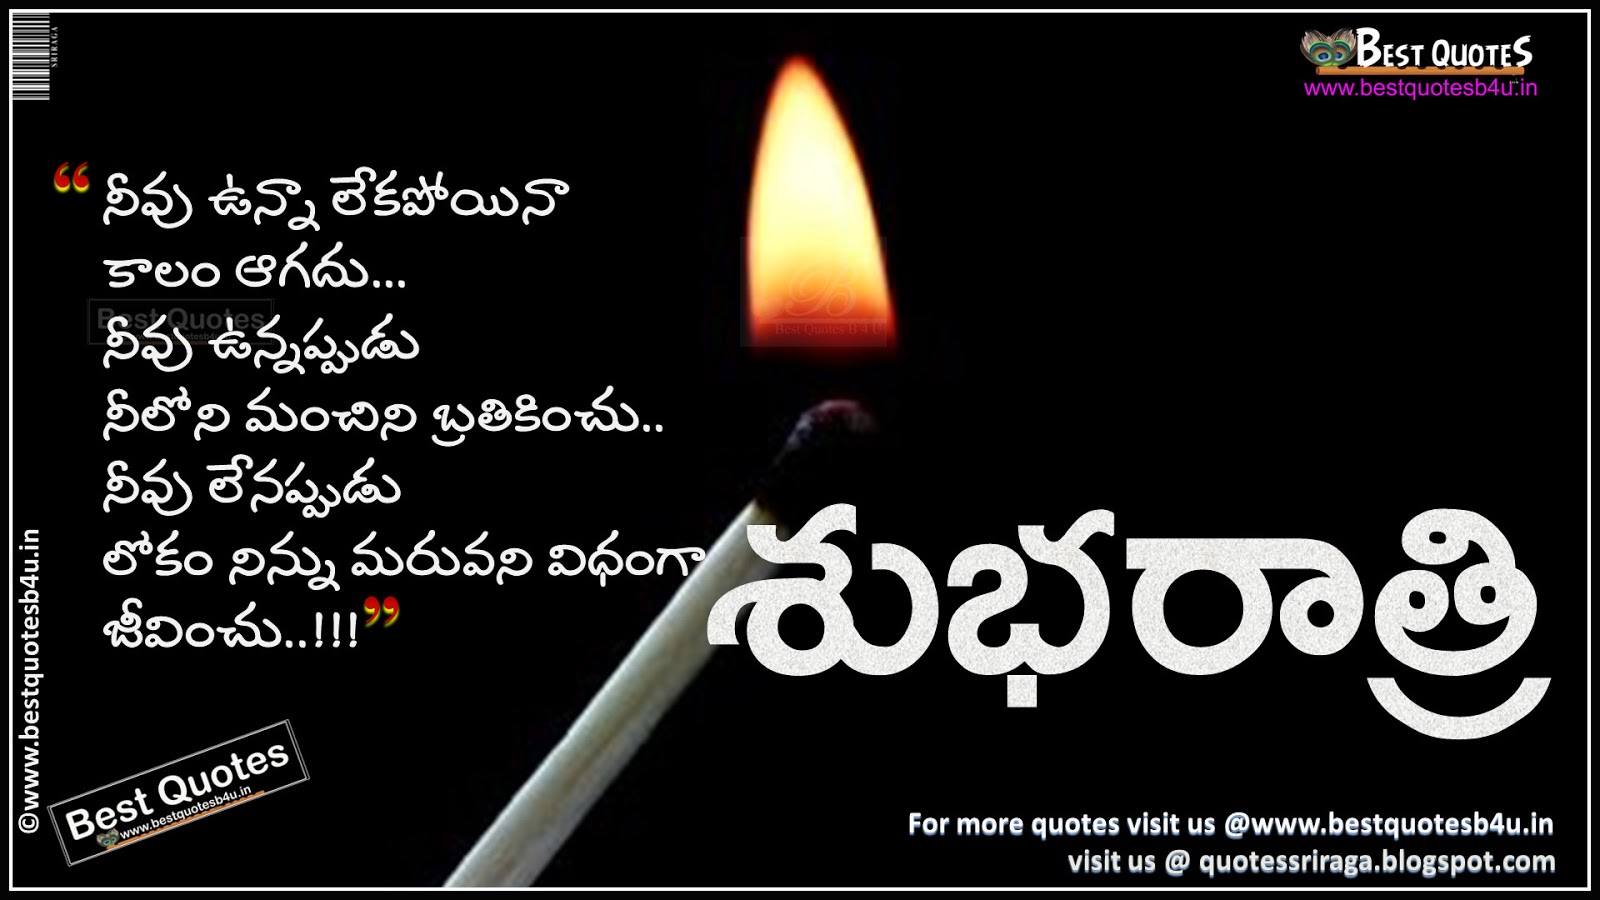 Telugu Good night sms whatsapp messages with life thoughts